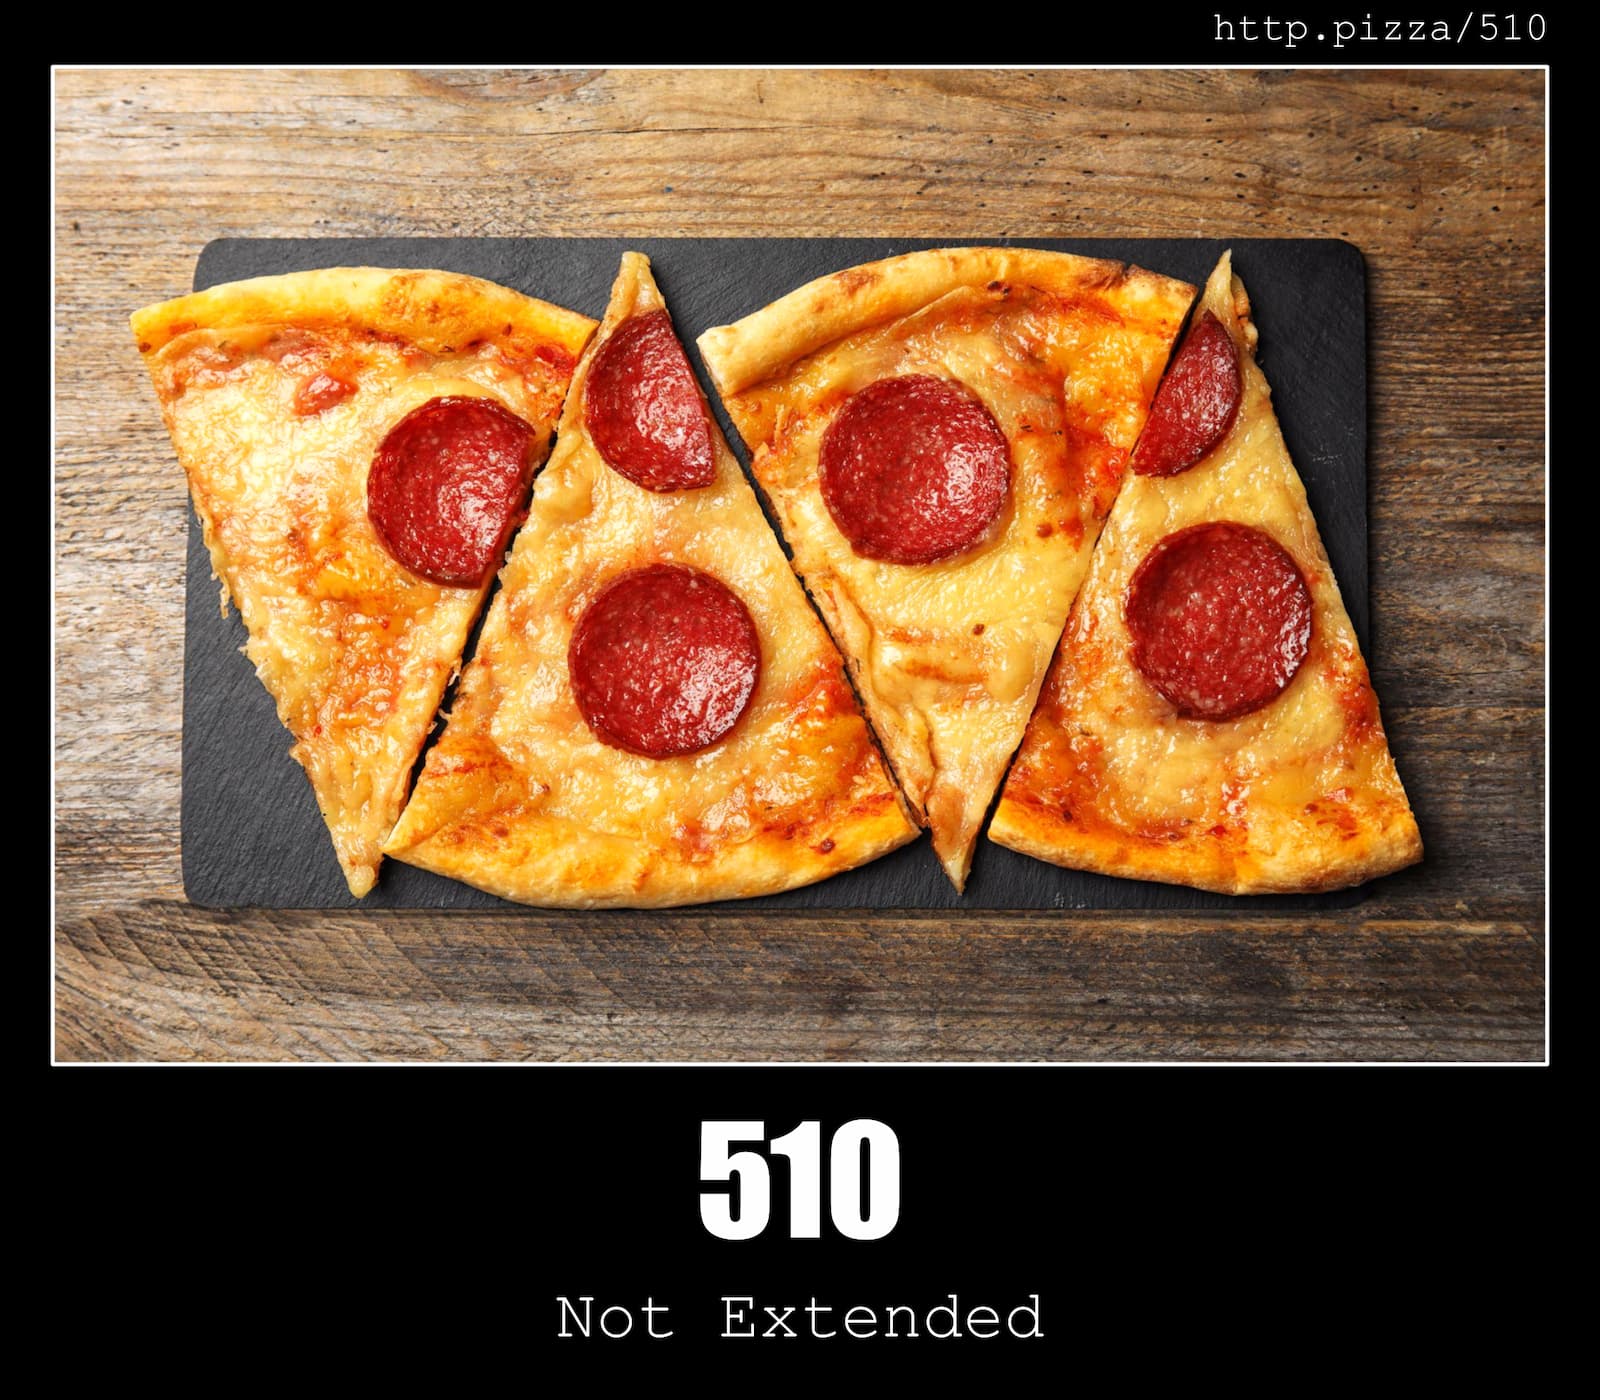 HTTP Status Code 510 Not Extended & Pizzas